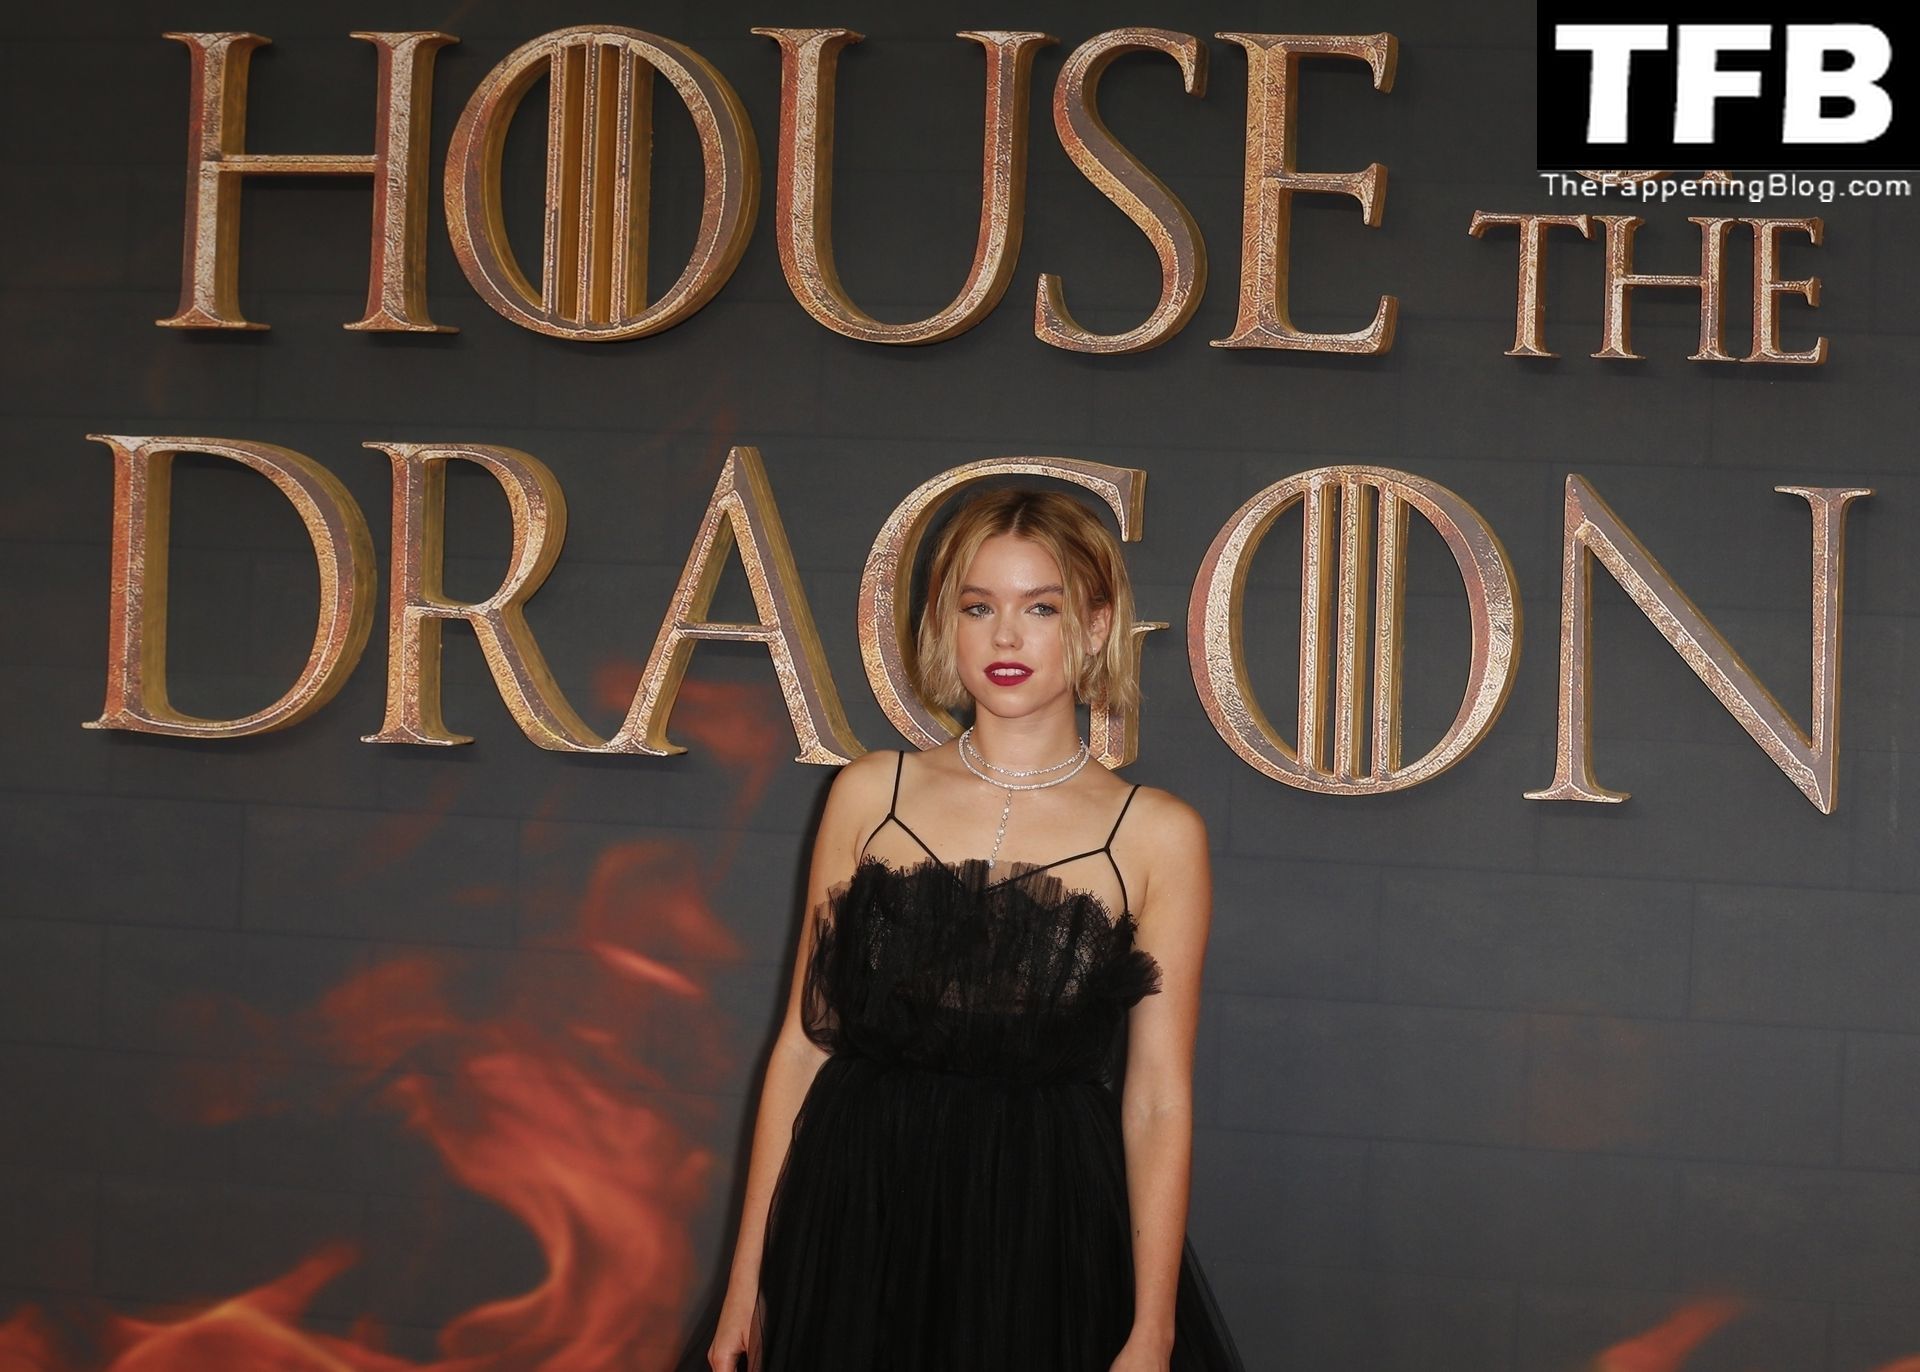 Milly Alcock Sexy The Fappening Blog 15 1 - Milly Alcock Poses in a Black Dress at the HBO’s “House of the Dragon” Premiere in London (23 Photos)